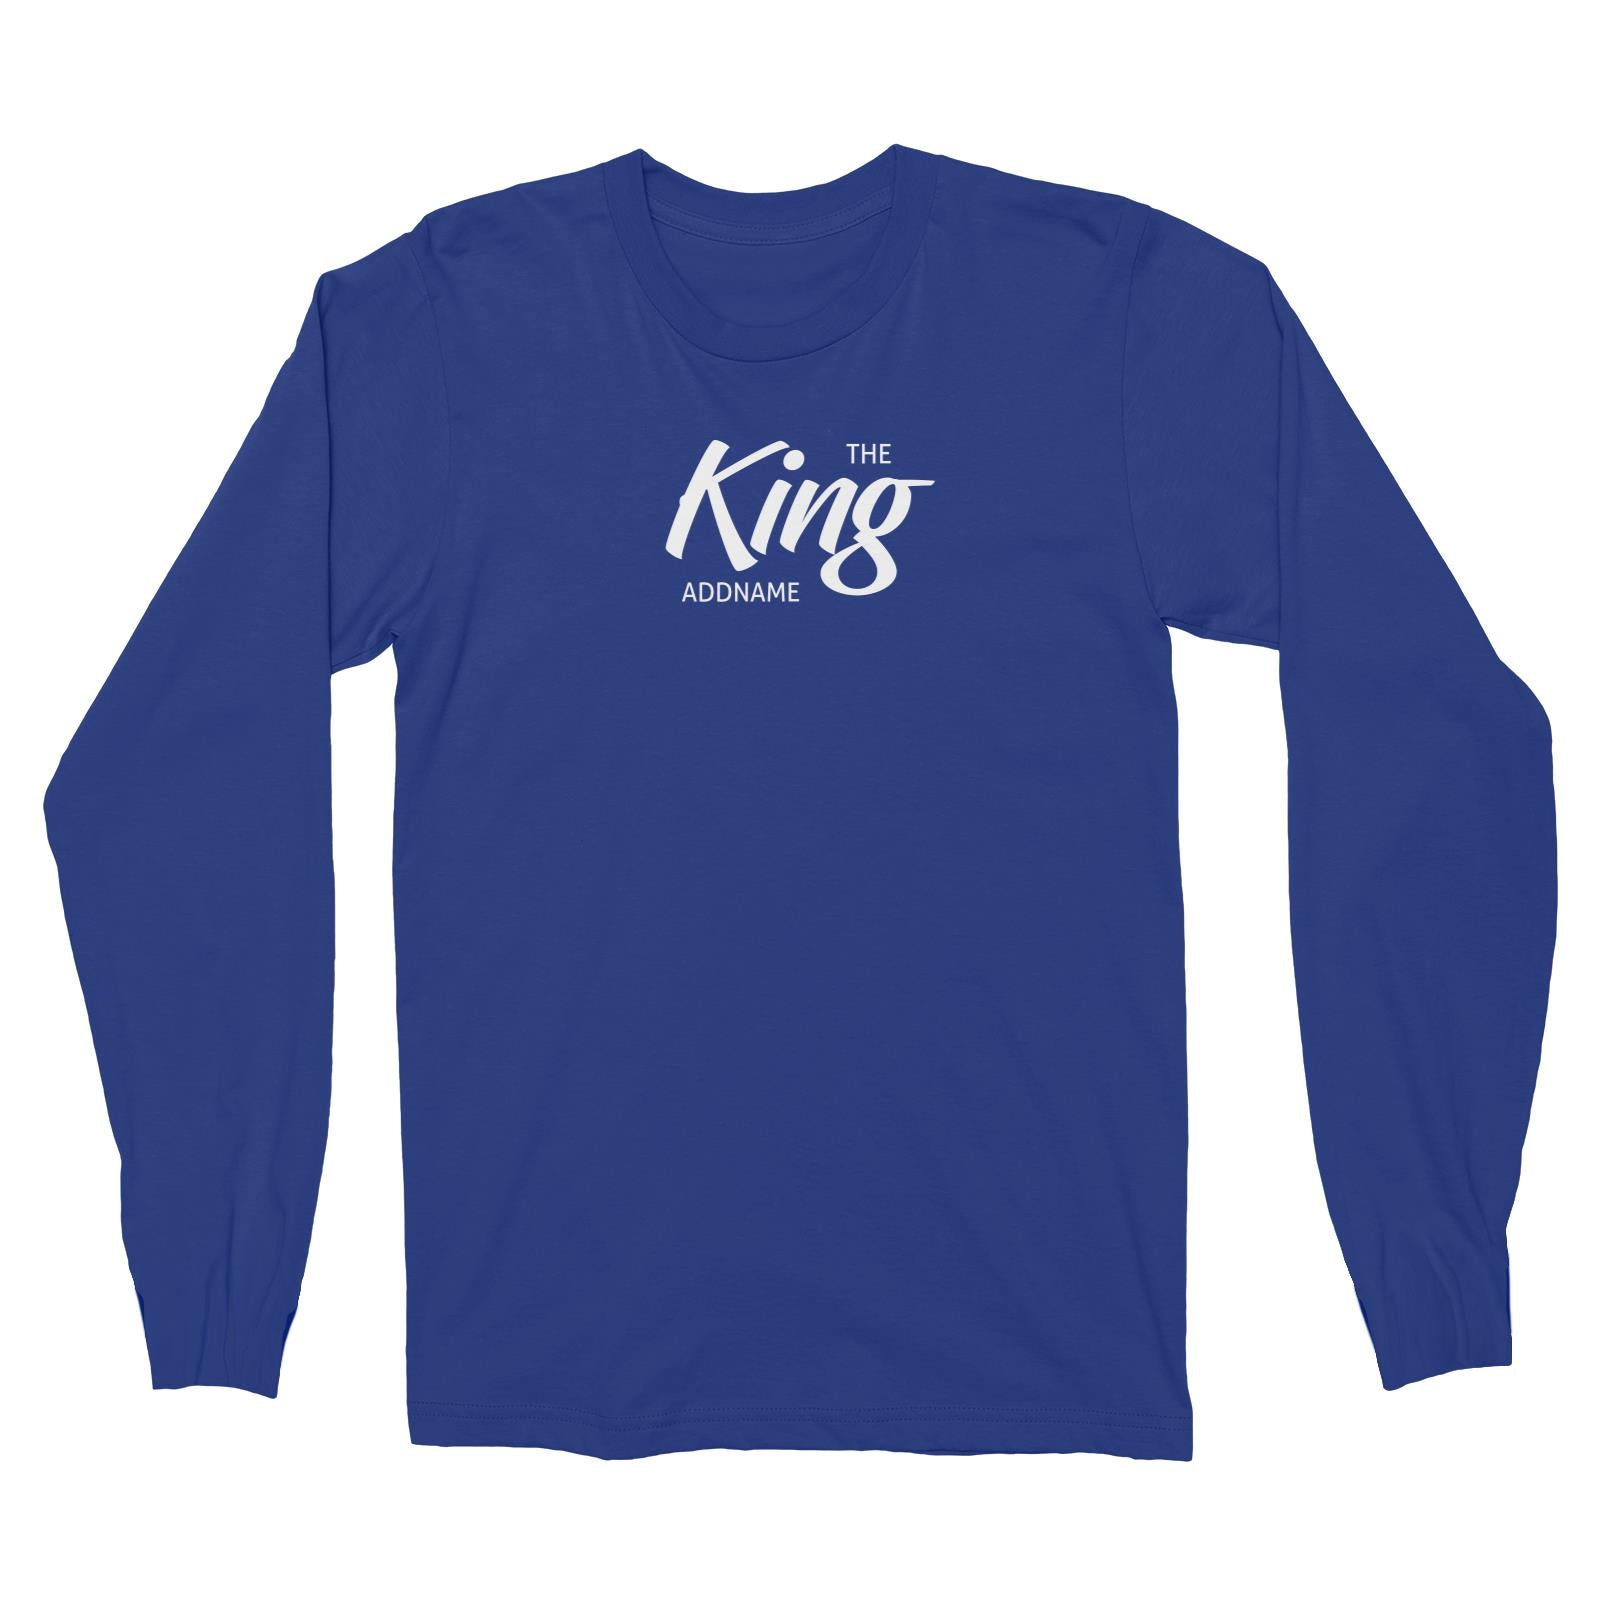 The King Addname Long Sleeve Unisex T-Shirt Personalizable Designs Matching Family Royal Family Edition Royal Simple